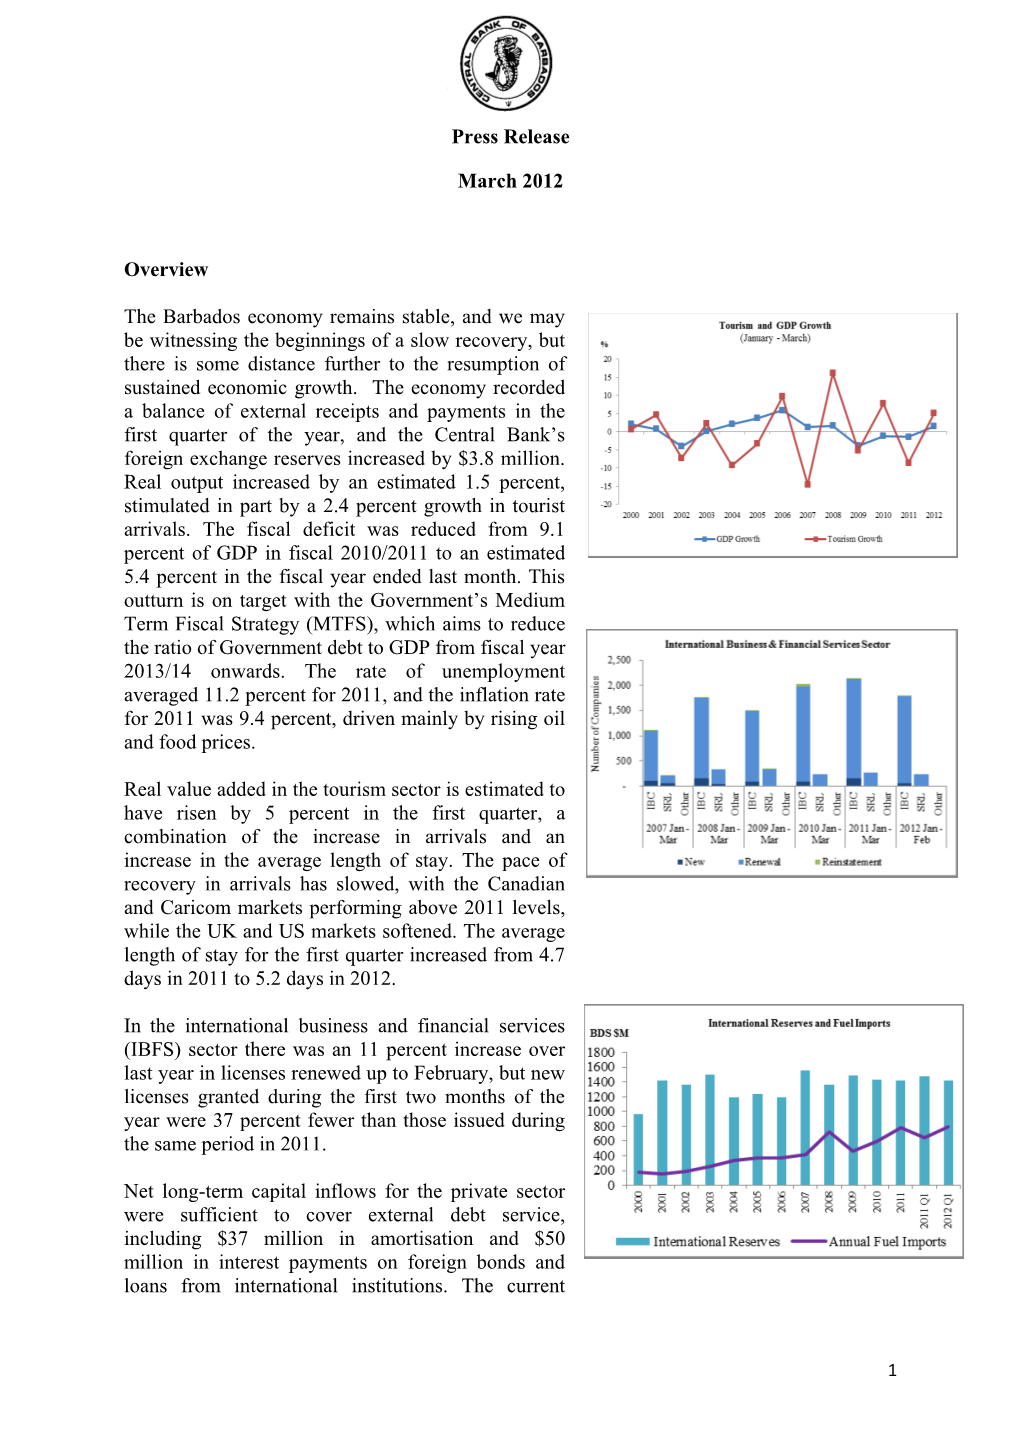 Press Release March 2012 Overview the Barbados Economy Remains